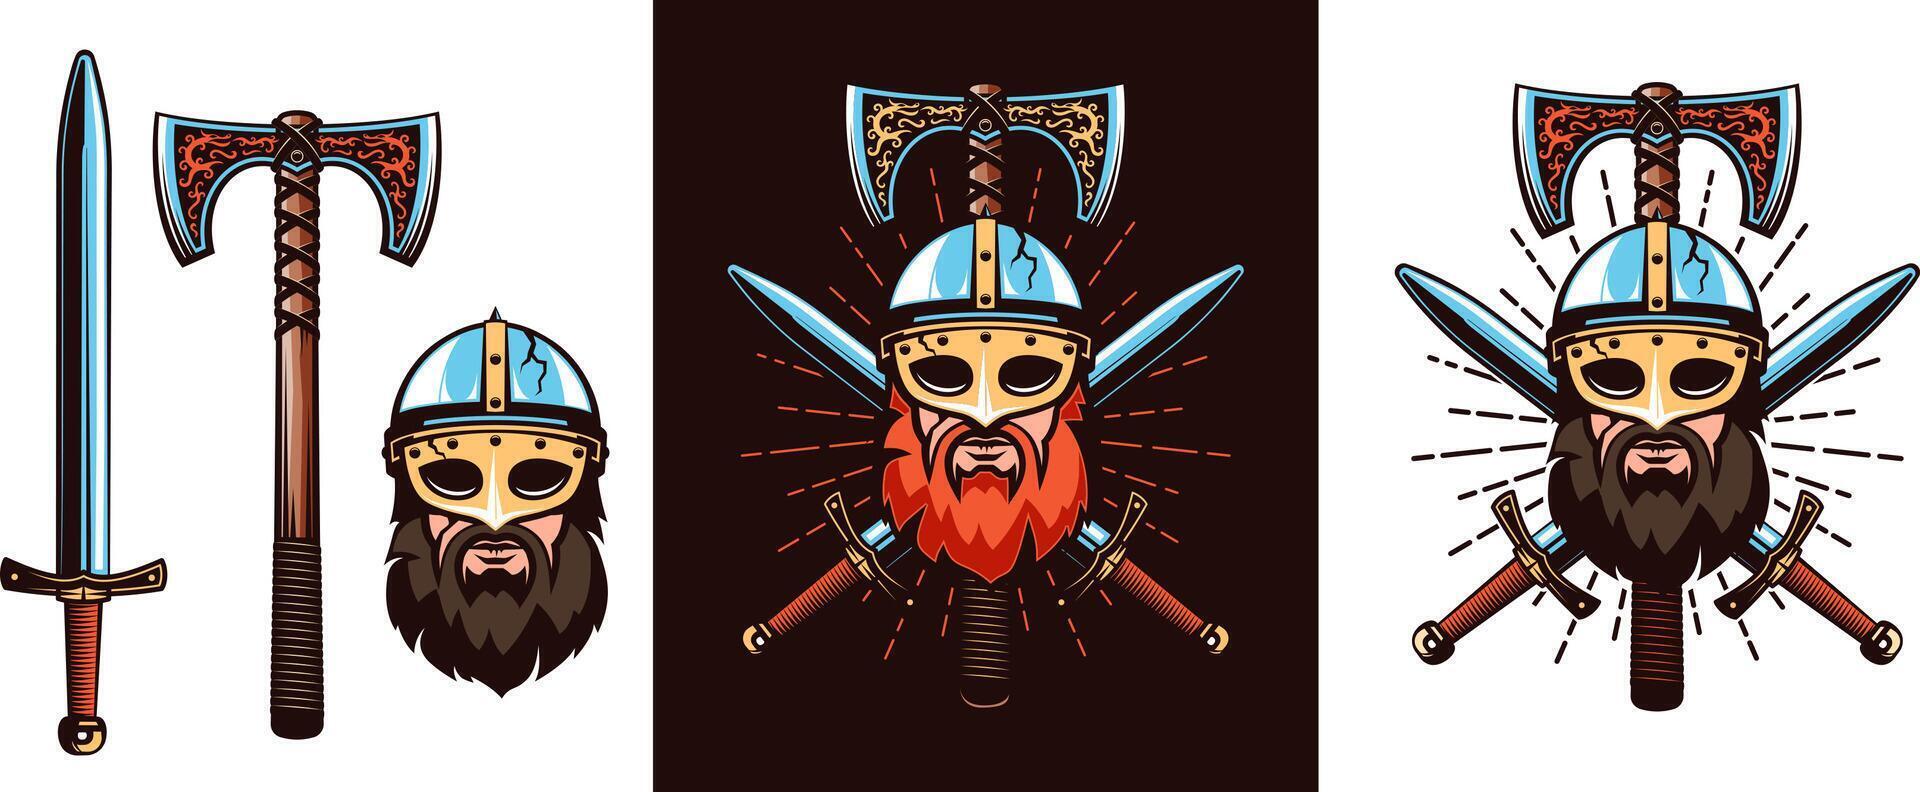 Warrior emblem with bearded Viking in helmet, double-edged axe and crossed swords. illustration. vector